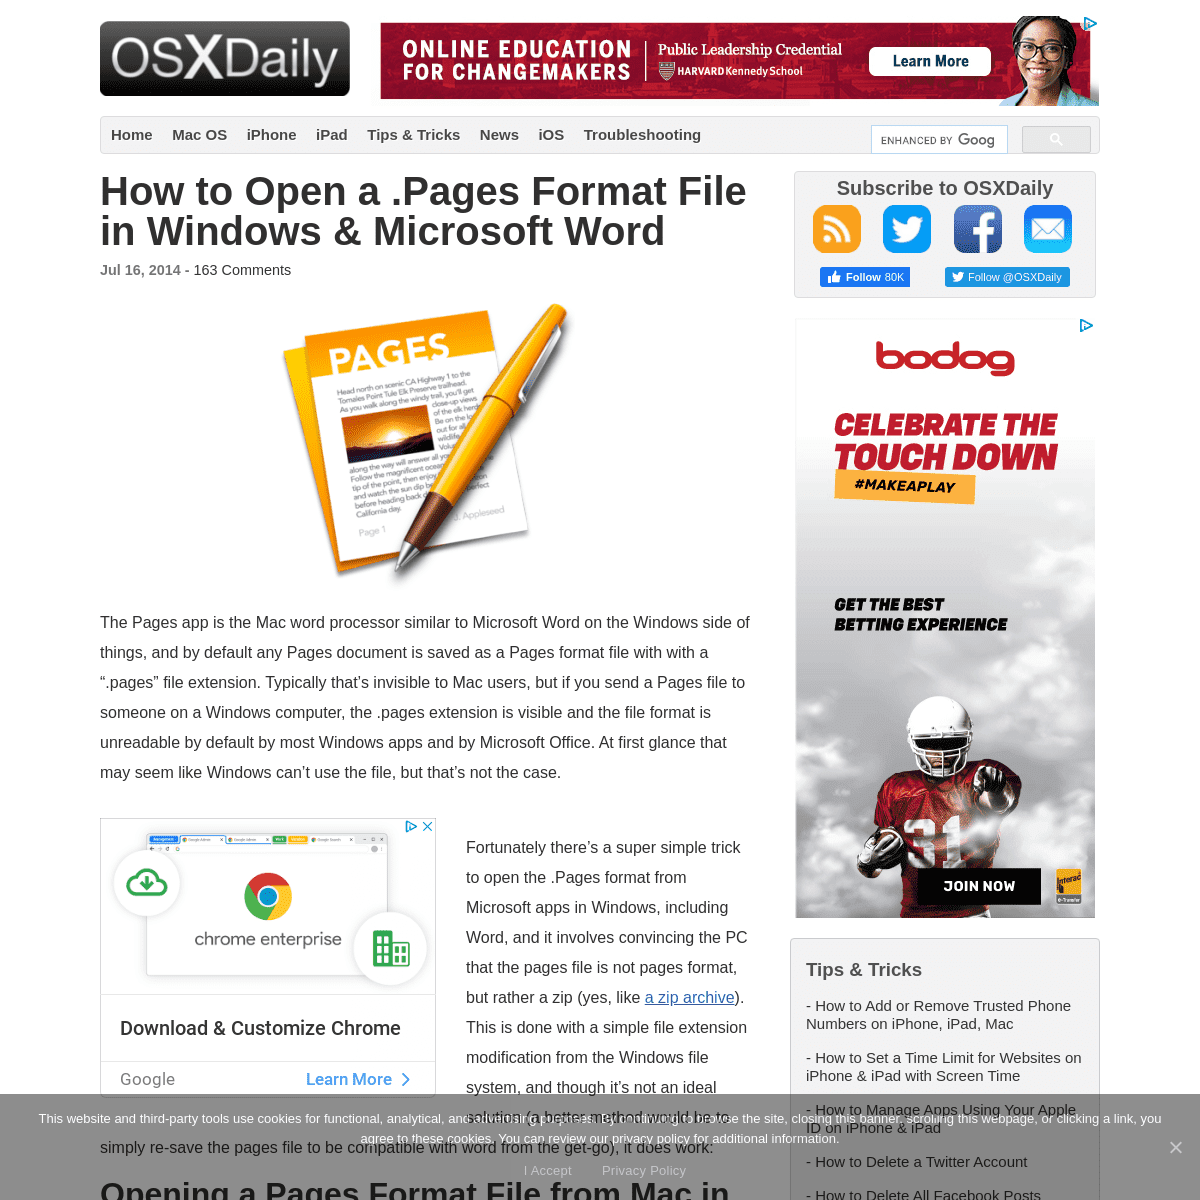 A complete backup of https://osxdaily.com/2014/07/16/open-pages-format-file-in-windows/